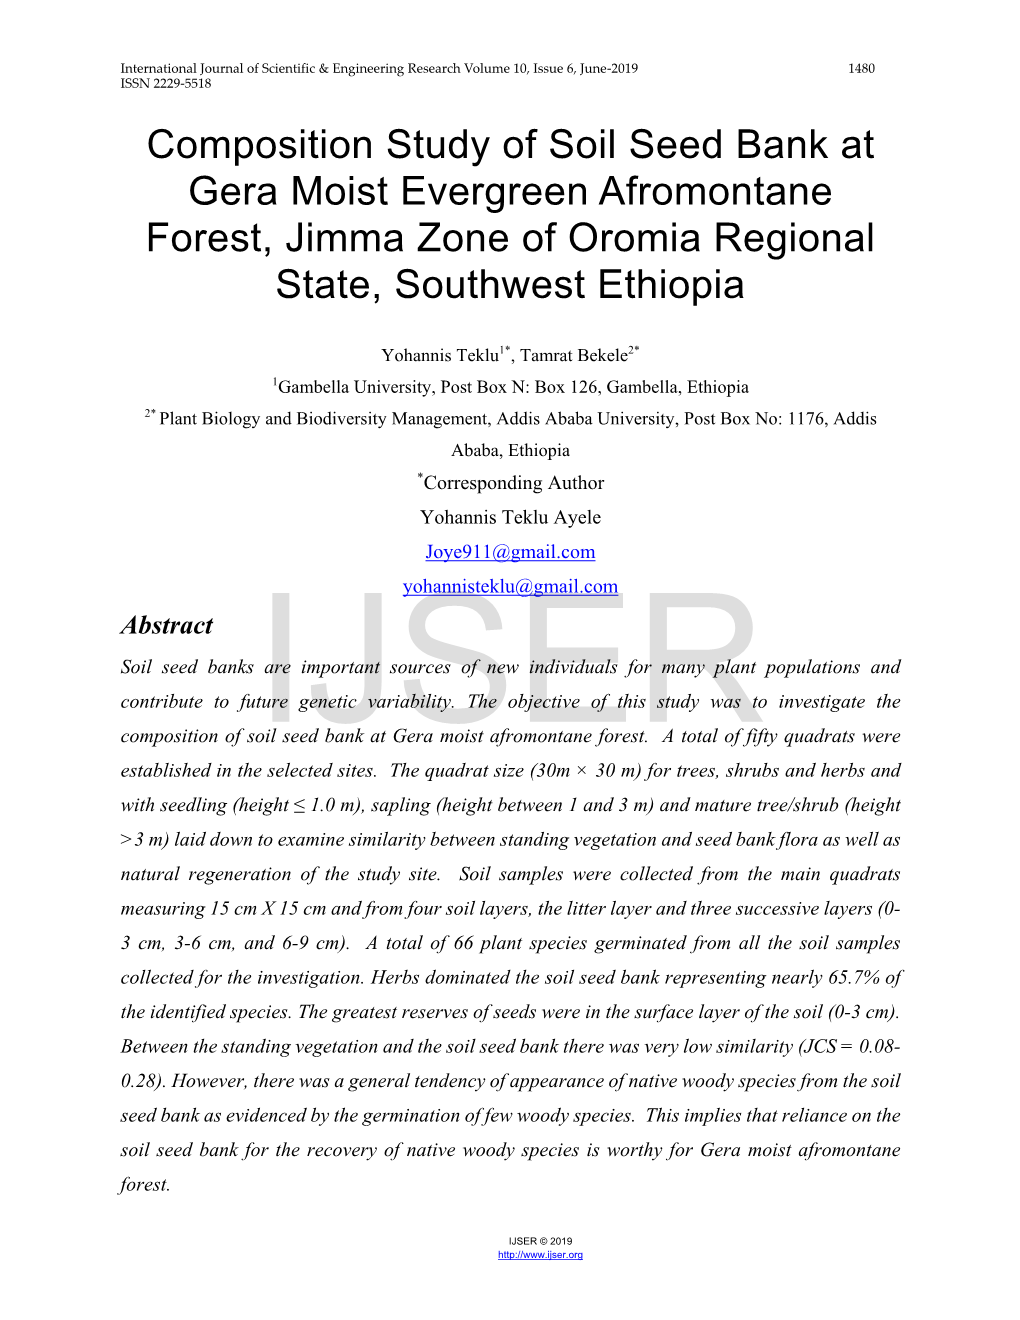 Composition Study of Soil Seed Bank at Gera Moist Evergreen Afromontane Forest, Jimma Zone of Oromia Regional State, Southwest Ethiopia